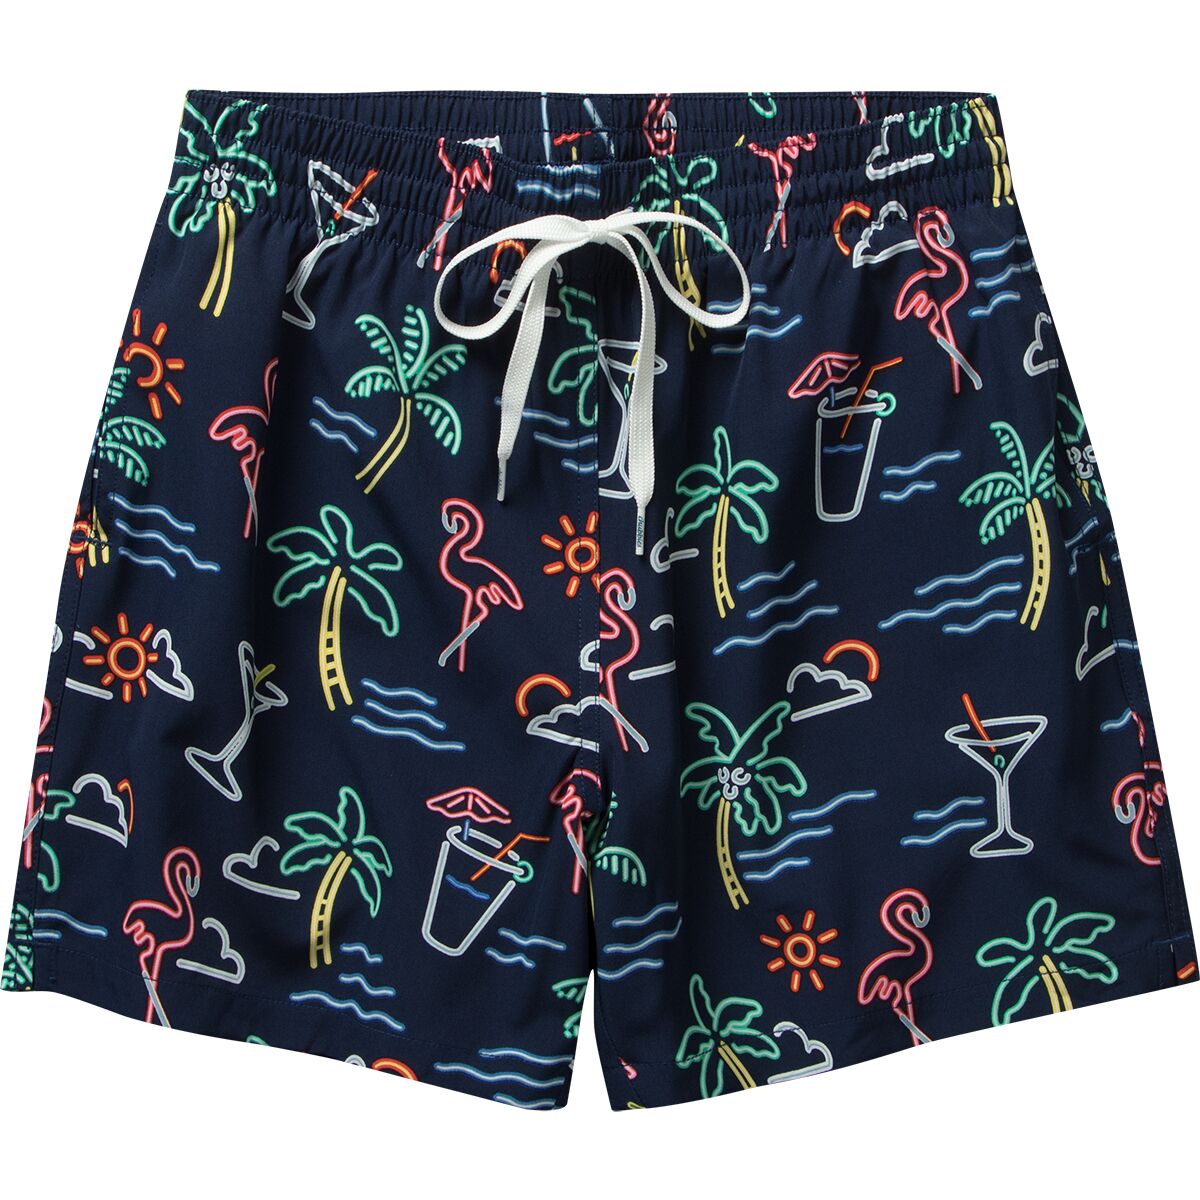 Chubbies The Neon Lights 5.5in Stretch Swim Trunk - Men's - Clothing